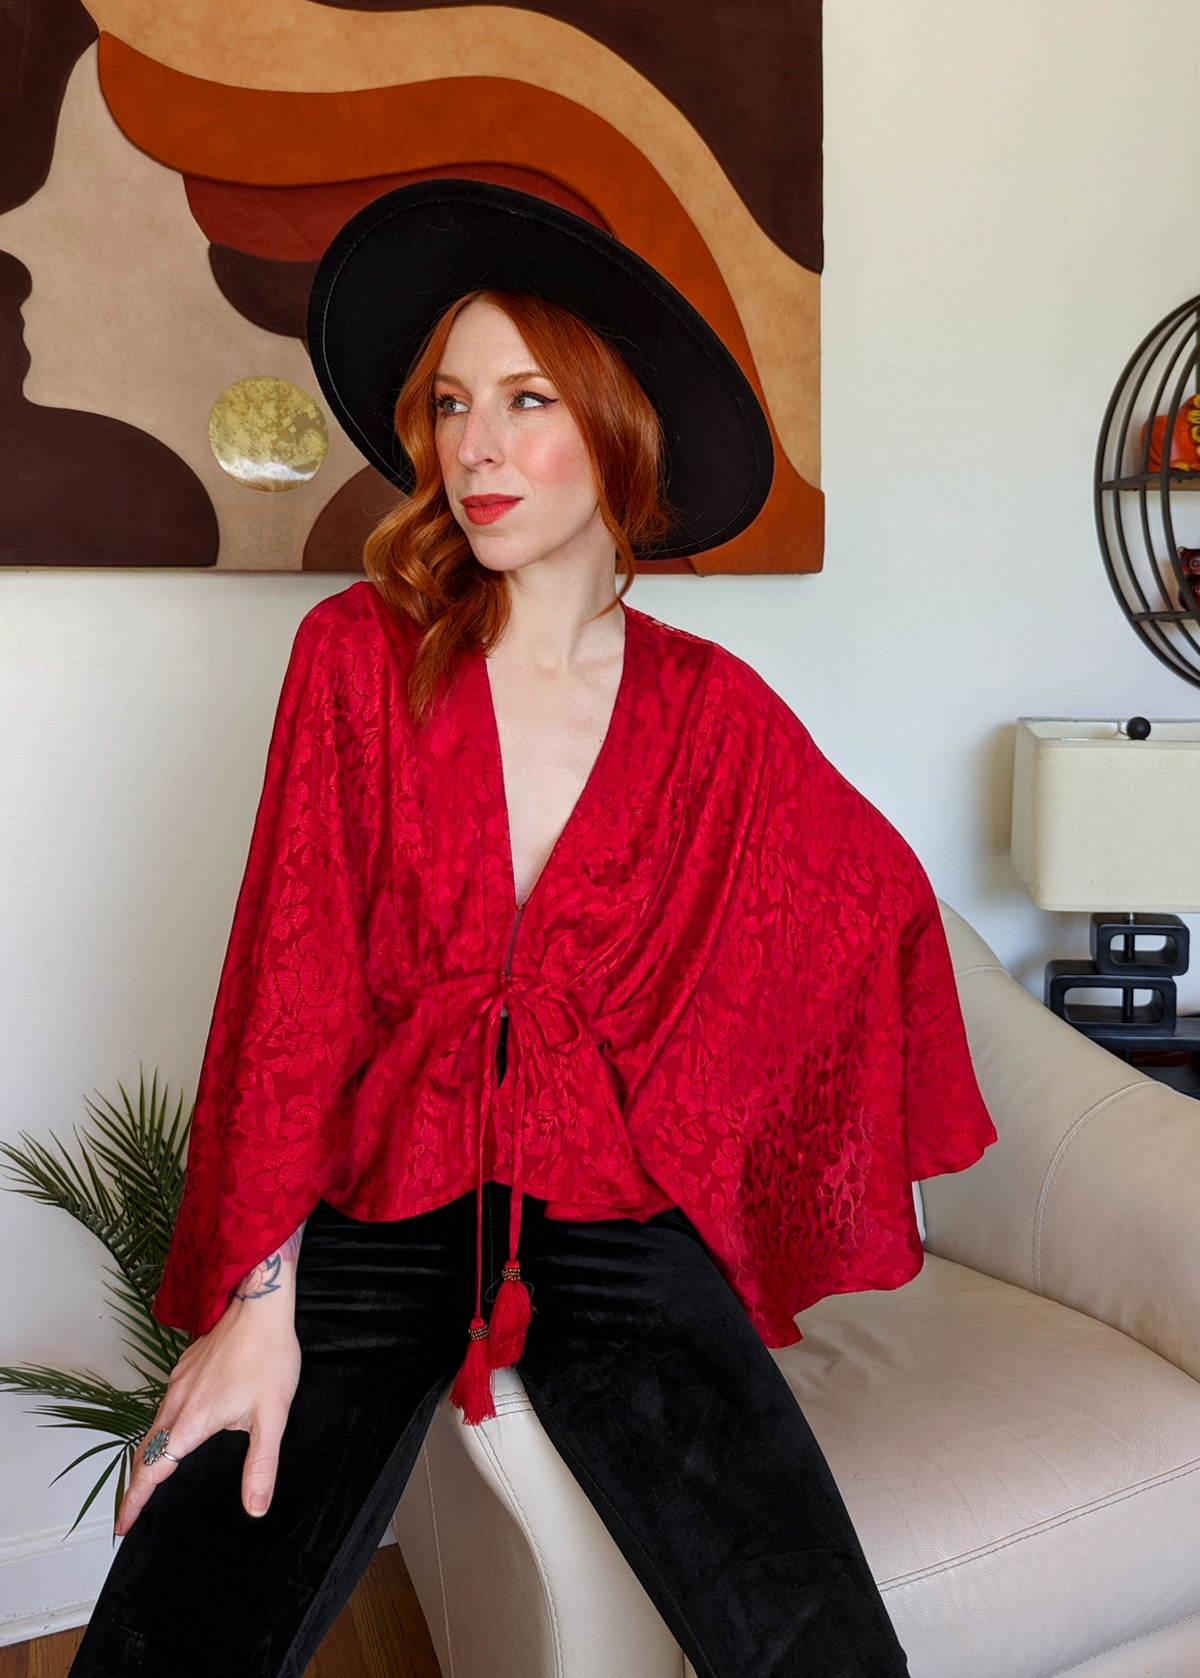 70s inspired ruby red satin batwing cape top with deep v-neckline and tonal floral pattern throughout the red satin fabric. Tassel tie details at front 